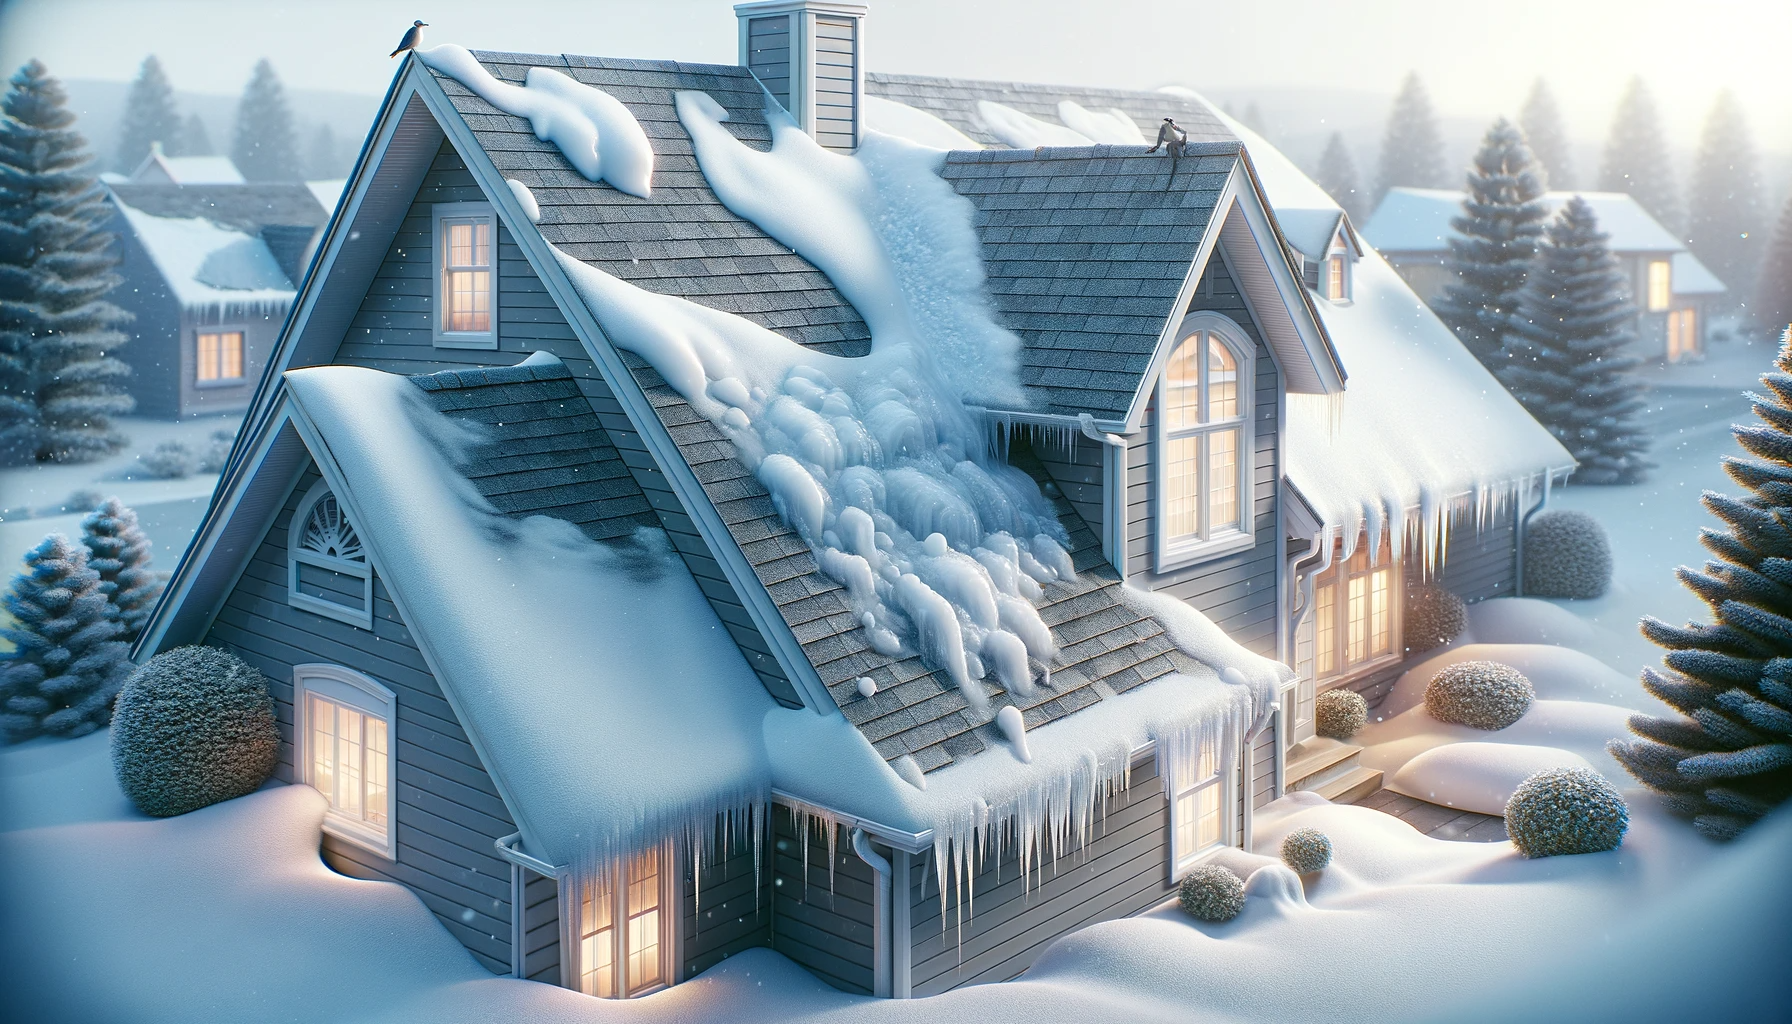 5 Common Roof Problems We See When Snow Falls